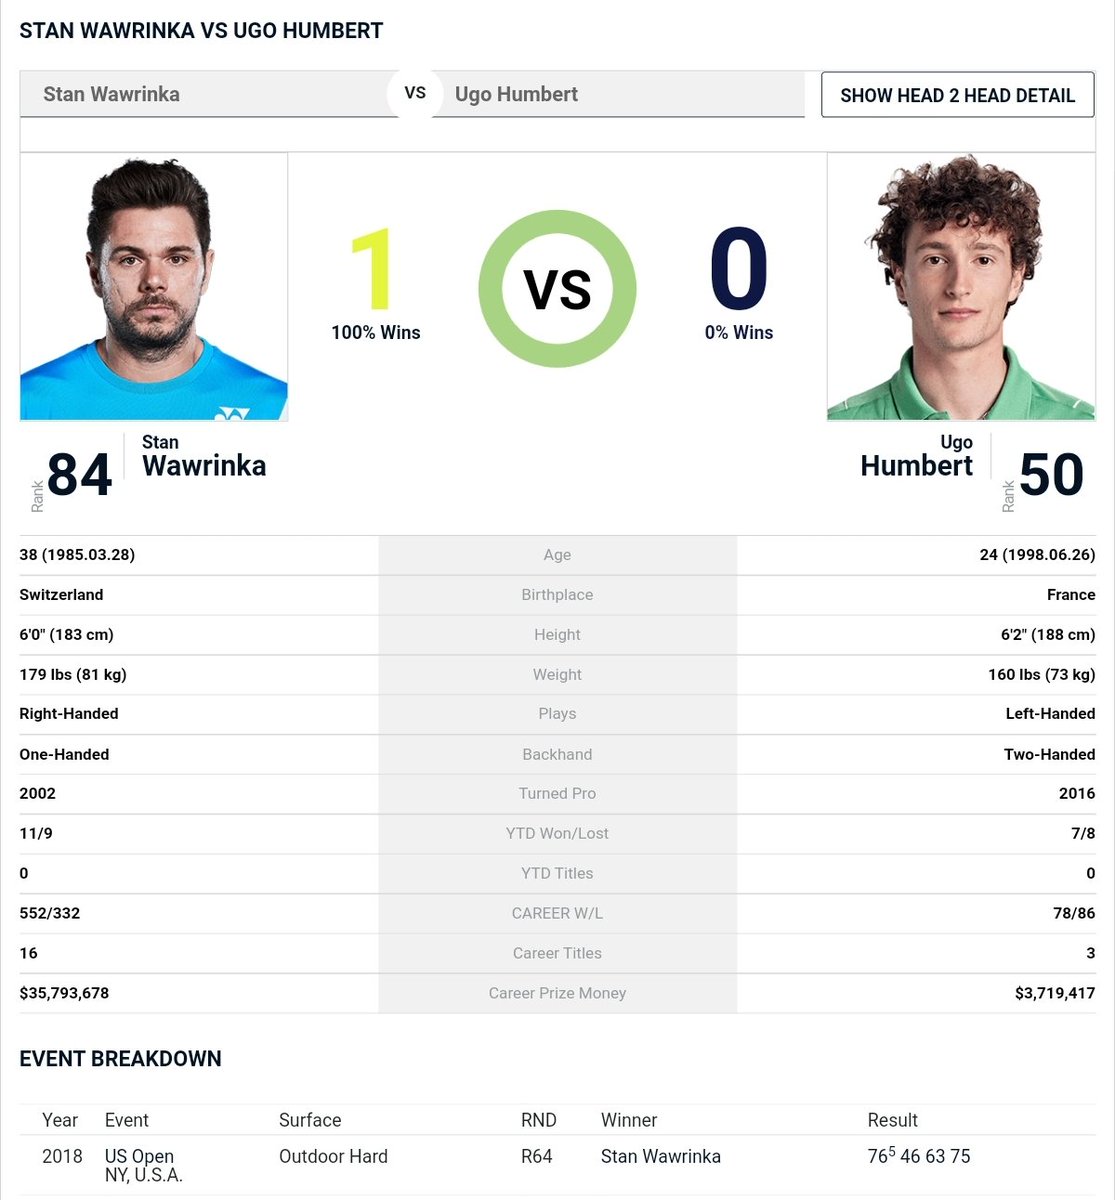 H2H for the QF match this afternoon in Bordeaux.

#BNPPprimrose #Wawrinka #Humbert